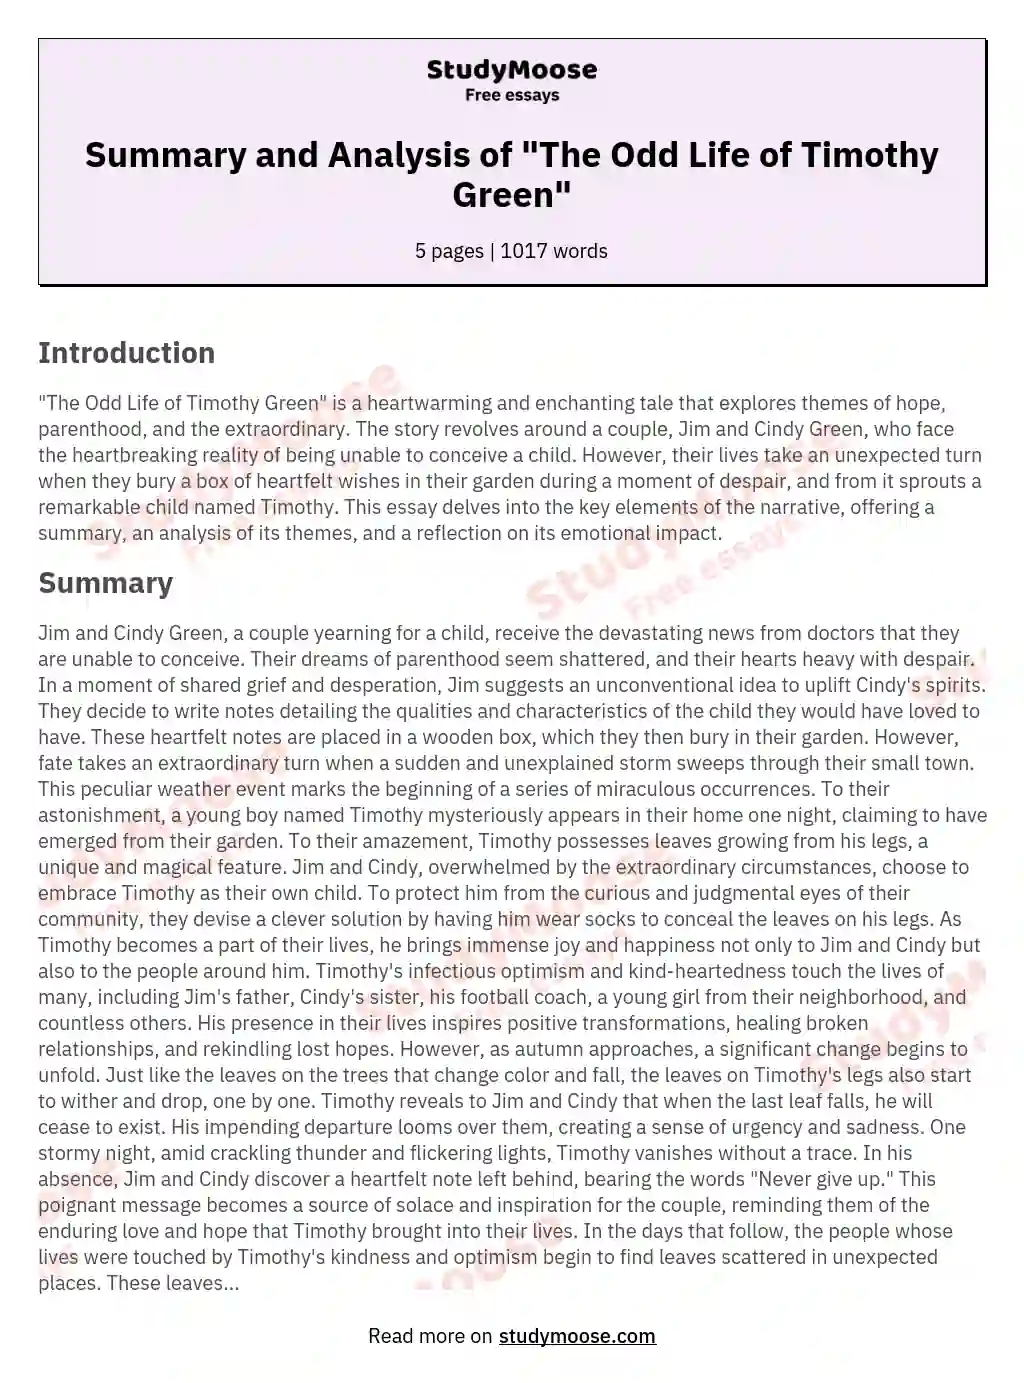 Summary and Analysis of "The Odd Life of Timothy Green" essay